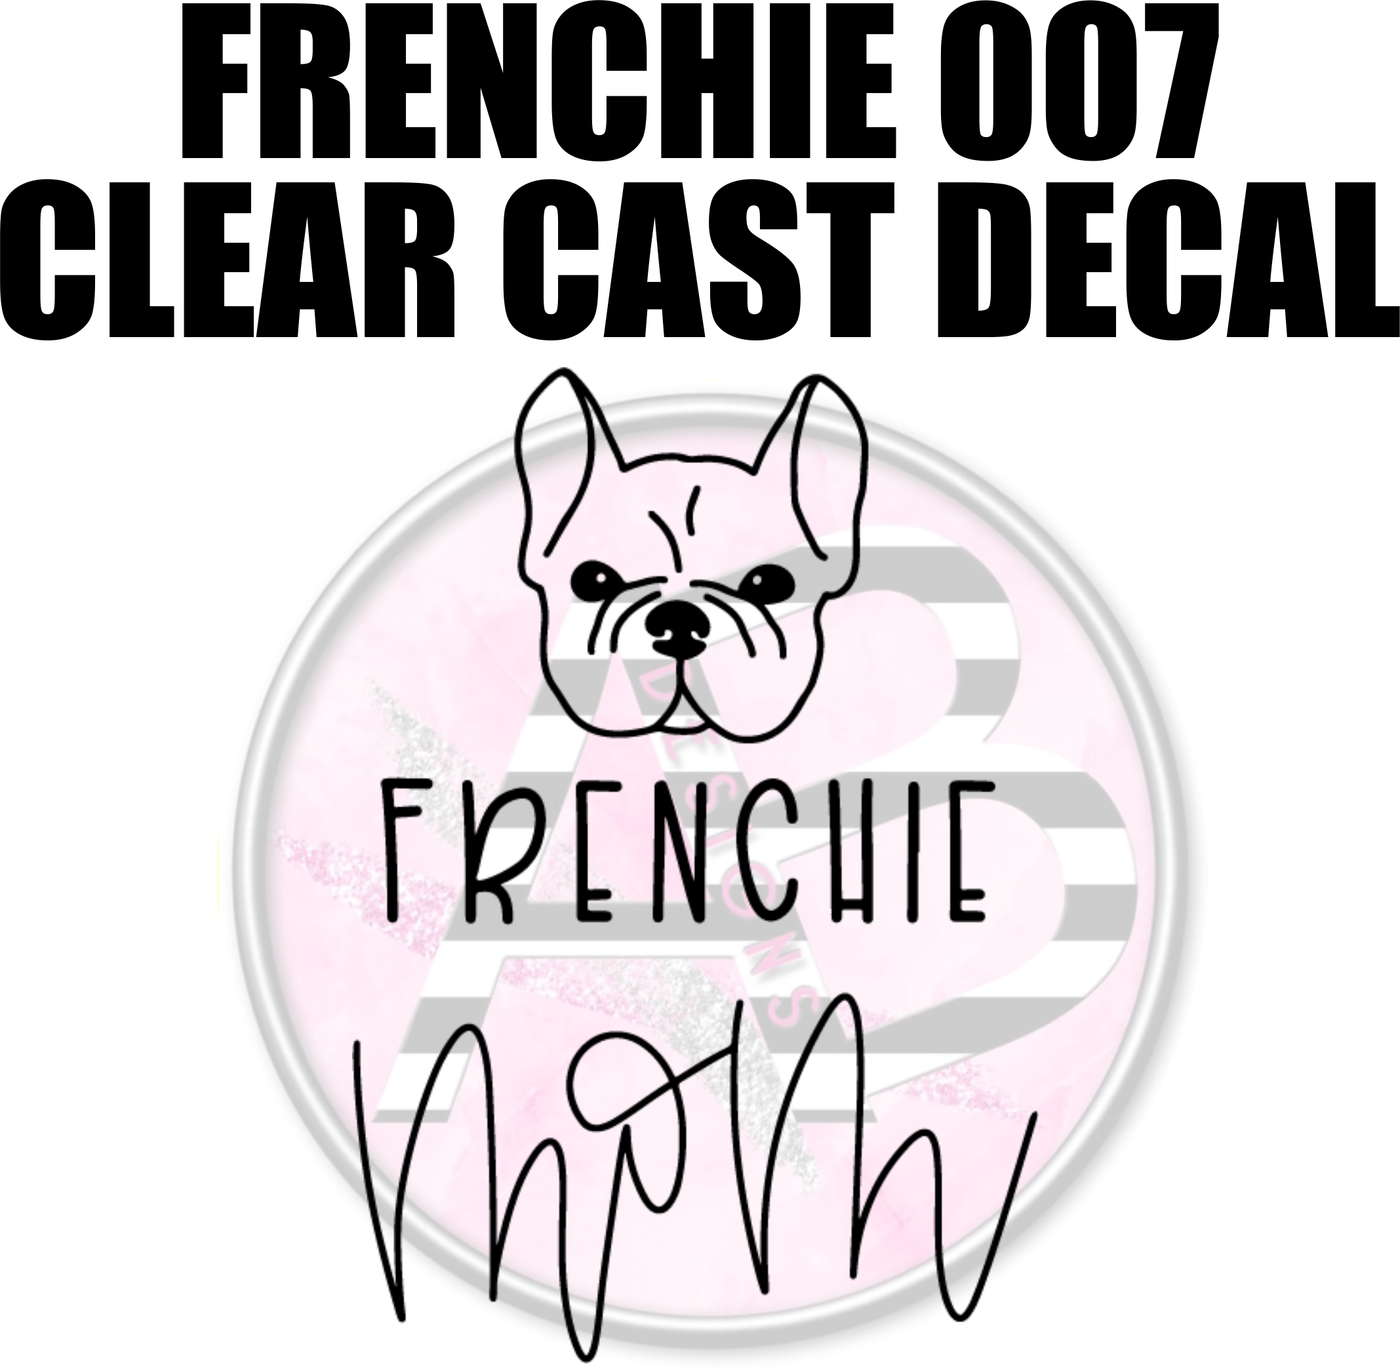 Frenchie 007 - Clear Cast Decal